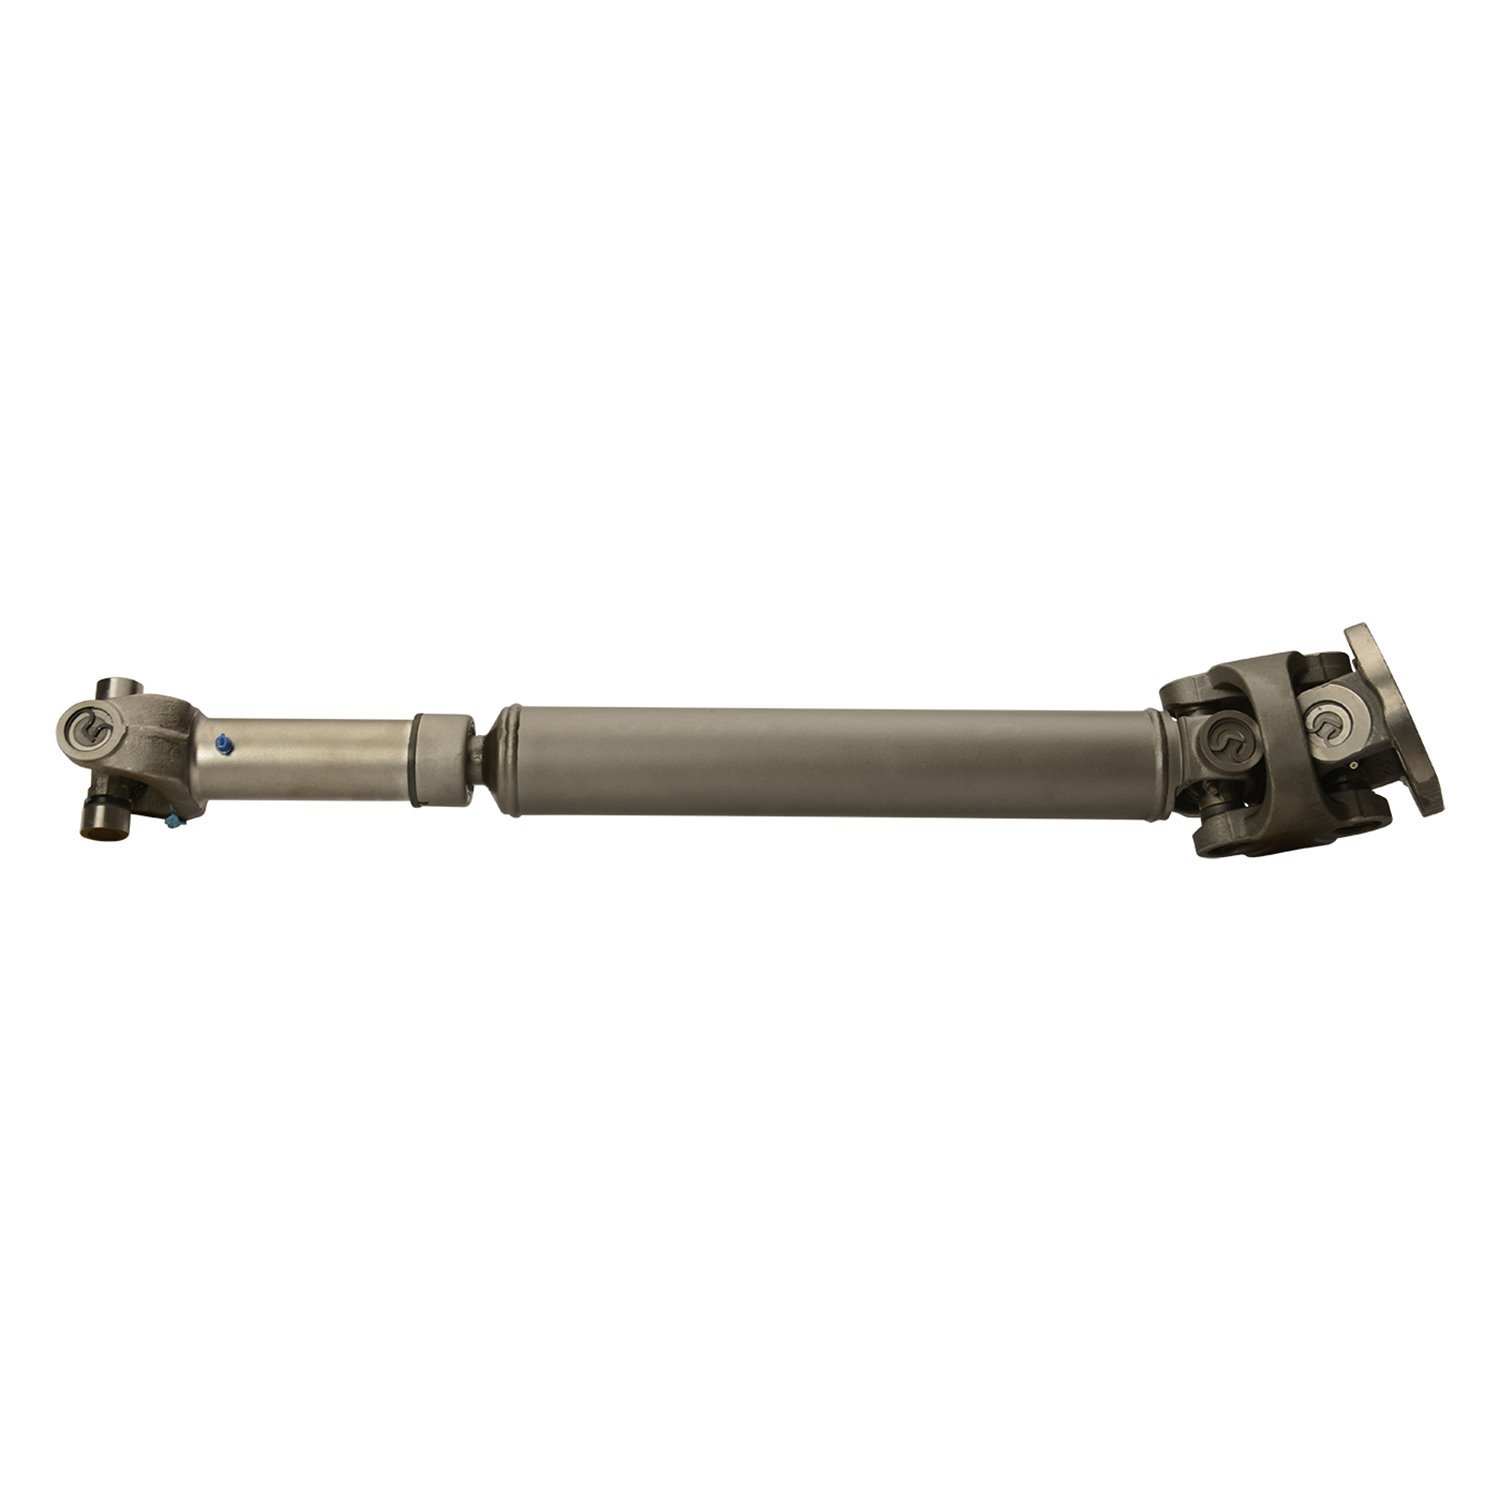 USA Standard ZDS9302 Front Driveshaft, Excursion/F-Series Trucks, 38.5 in. Center-To-Center